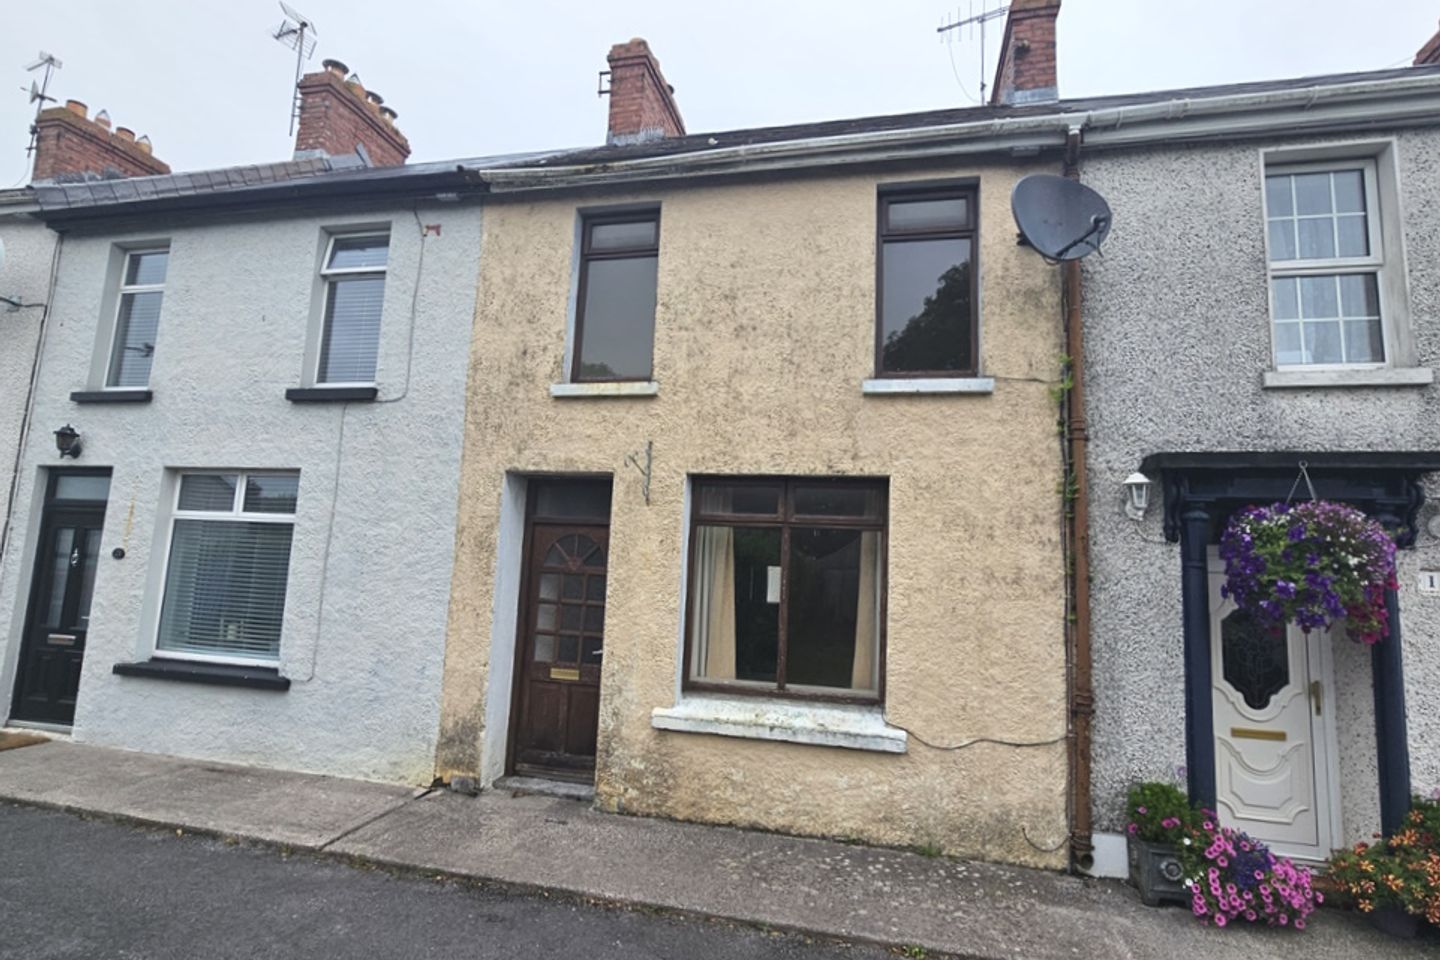 20 St. Mary's Terrace, Midleton, Co. Cork, P25ND29